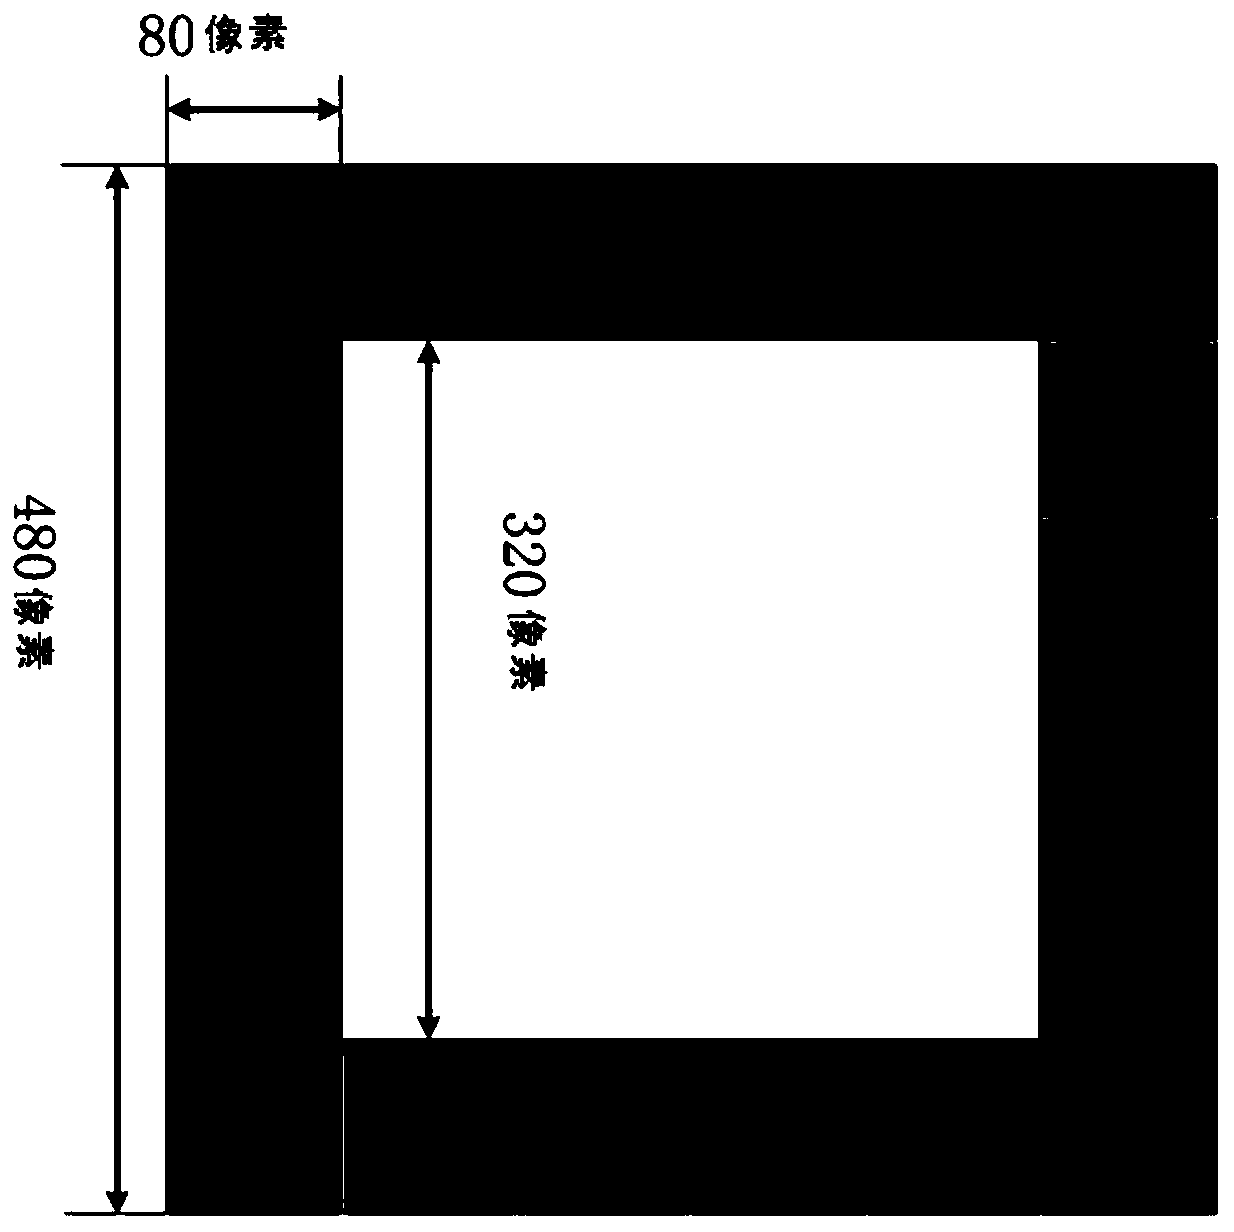 A calibration method for LED display based on reference objects